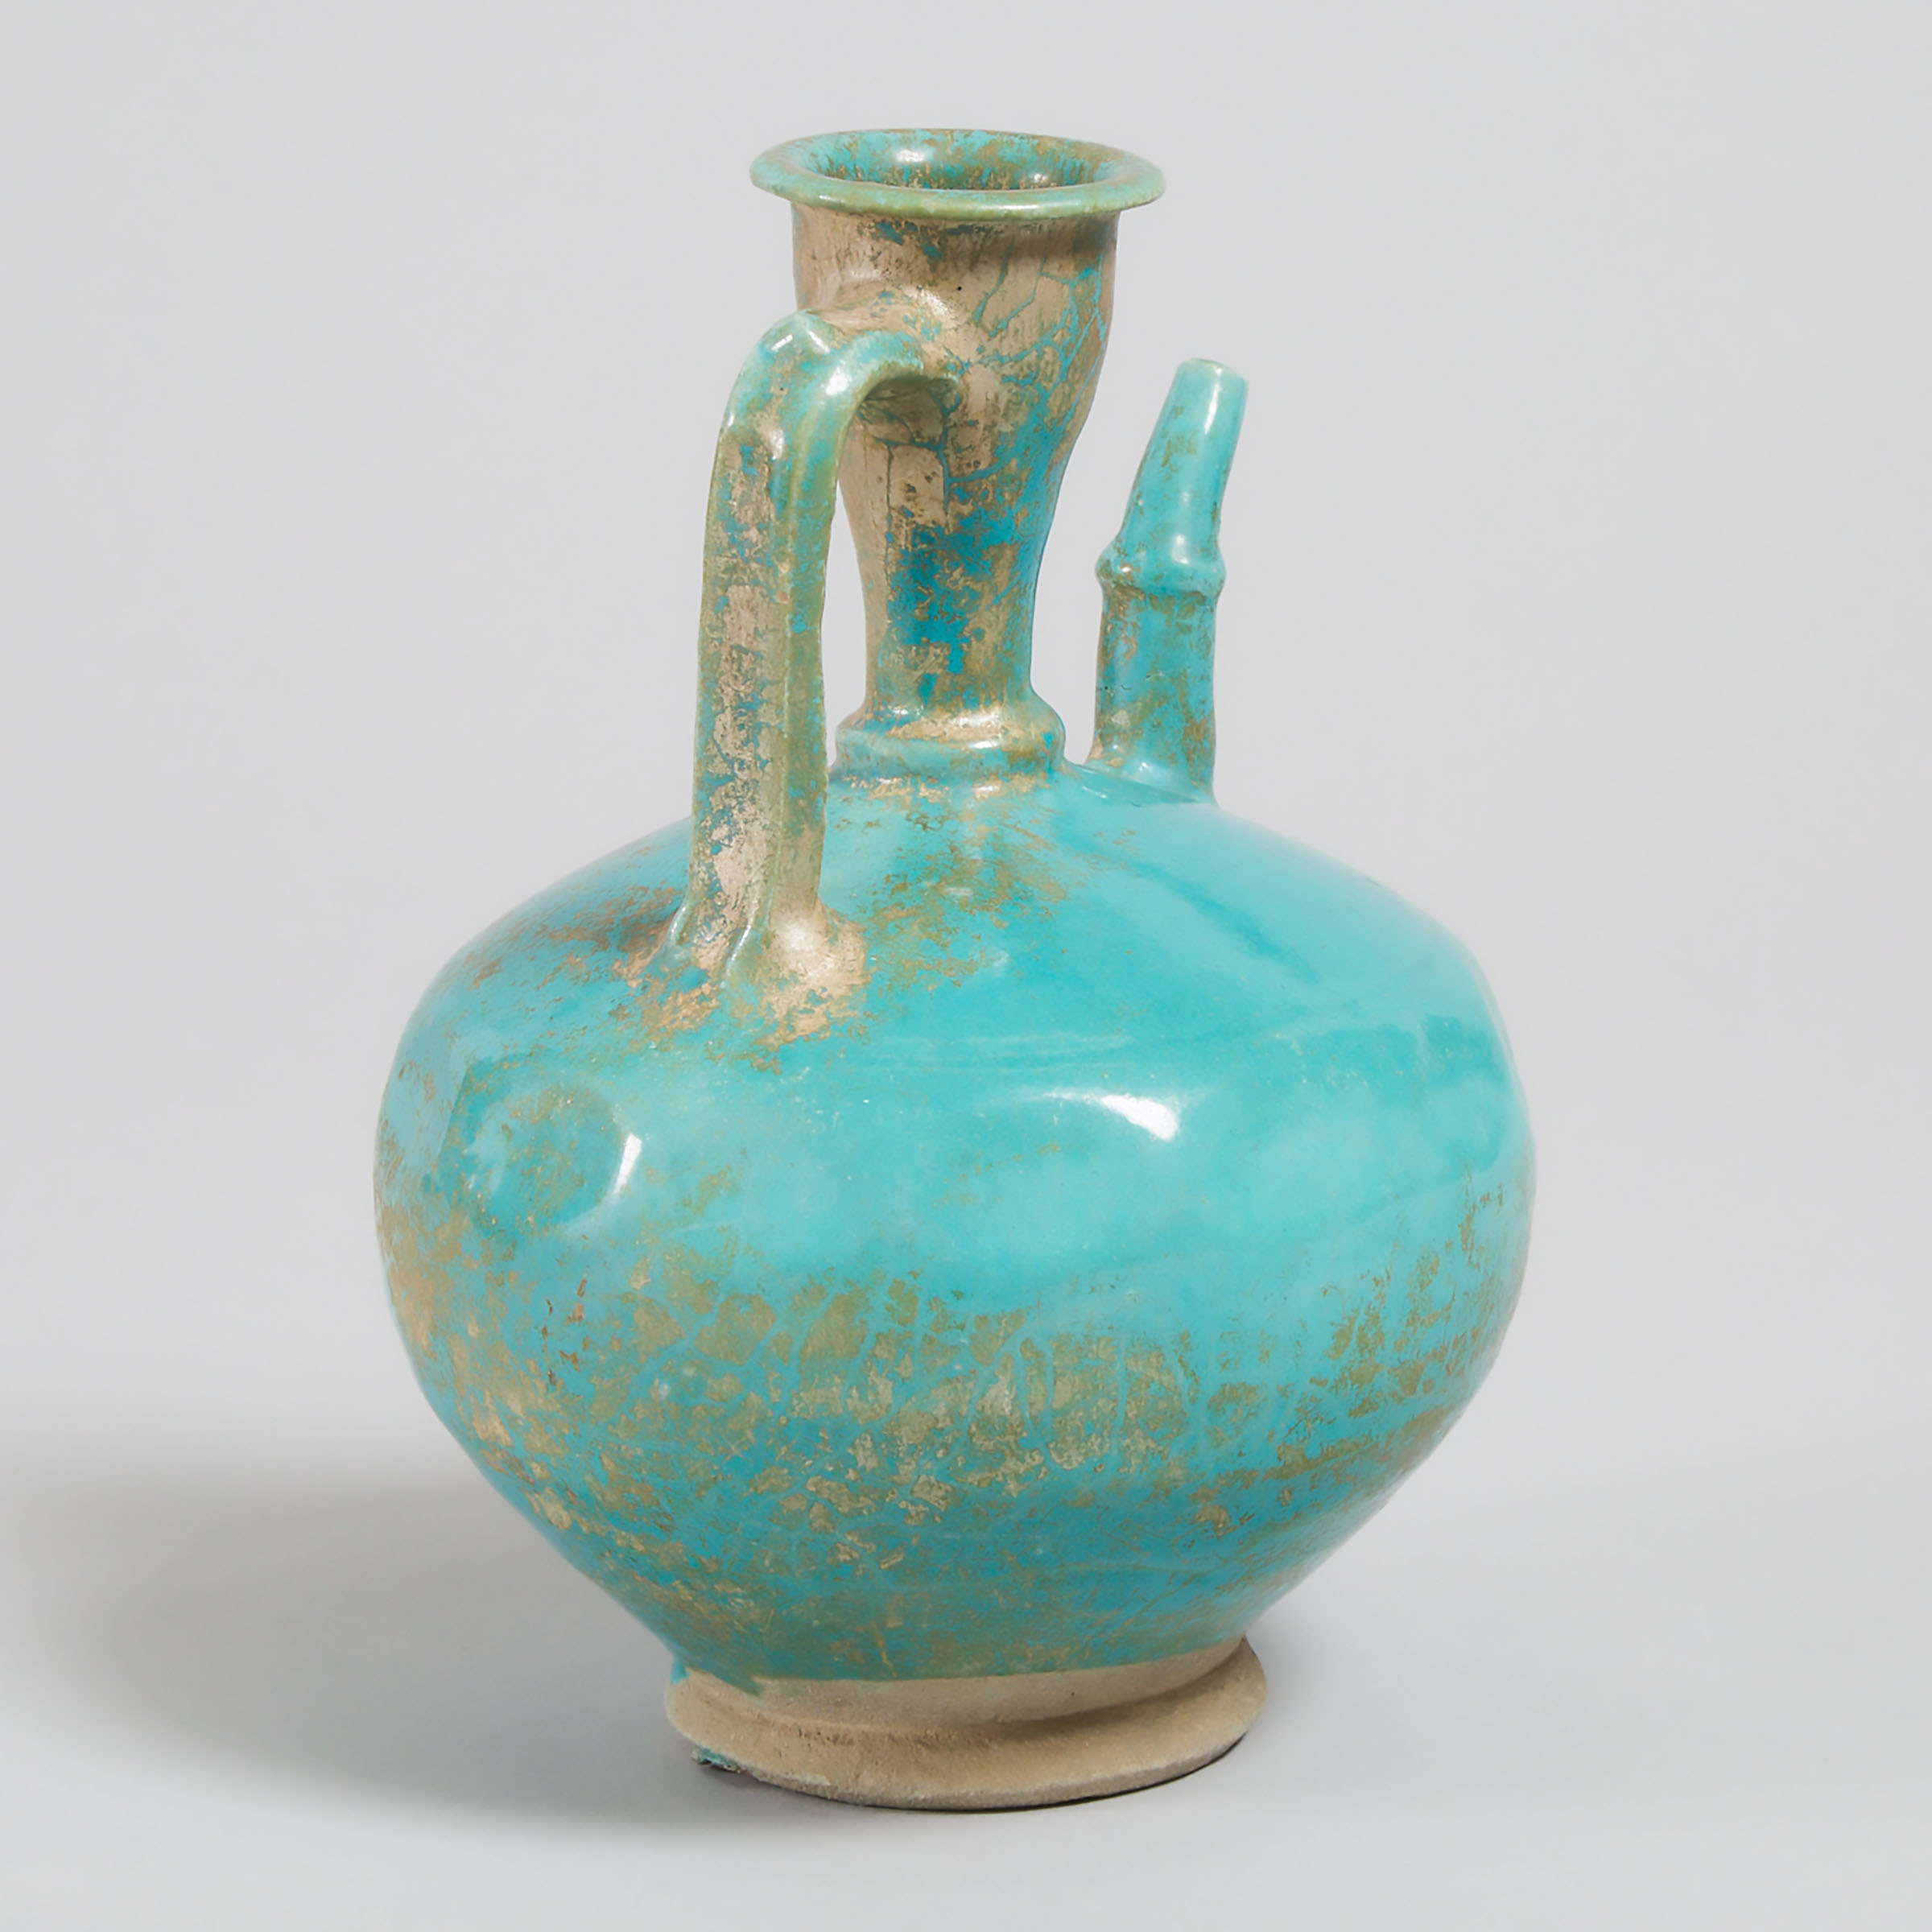 Persian Turquoise Glazed Fritware Pottery Ewer, 12th/13th century